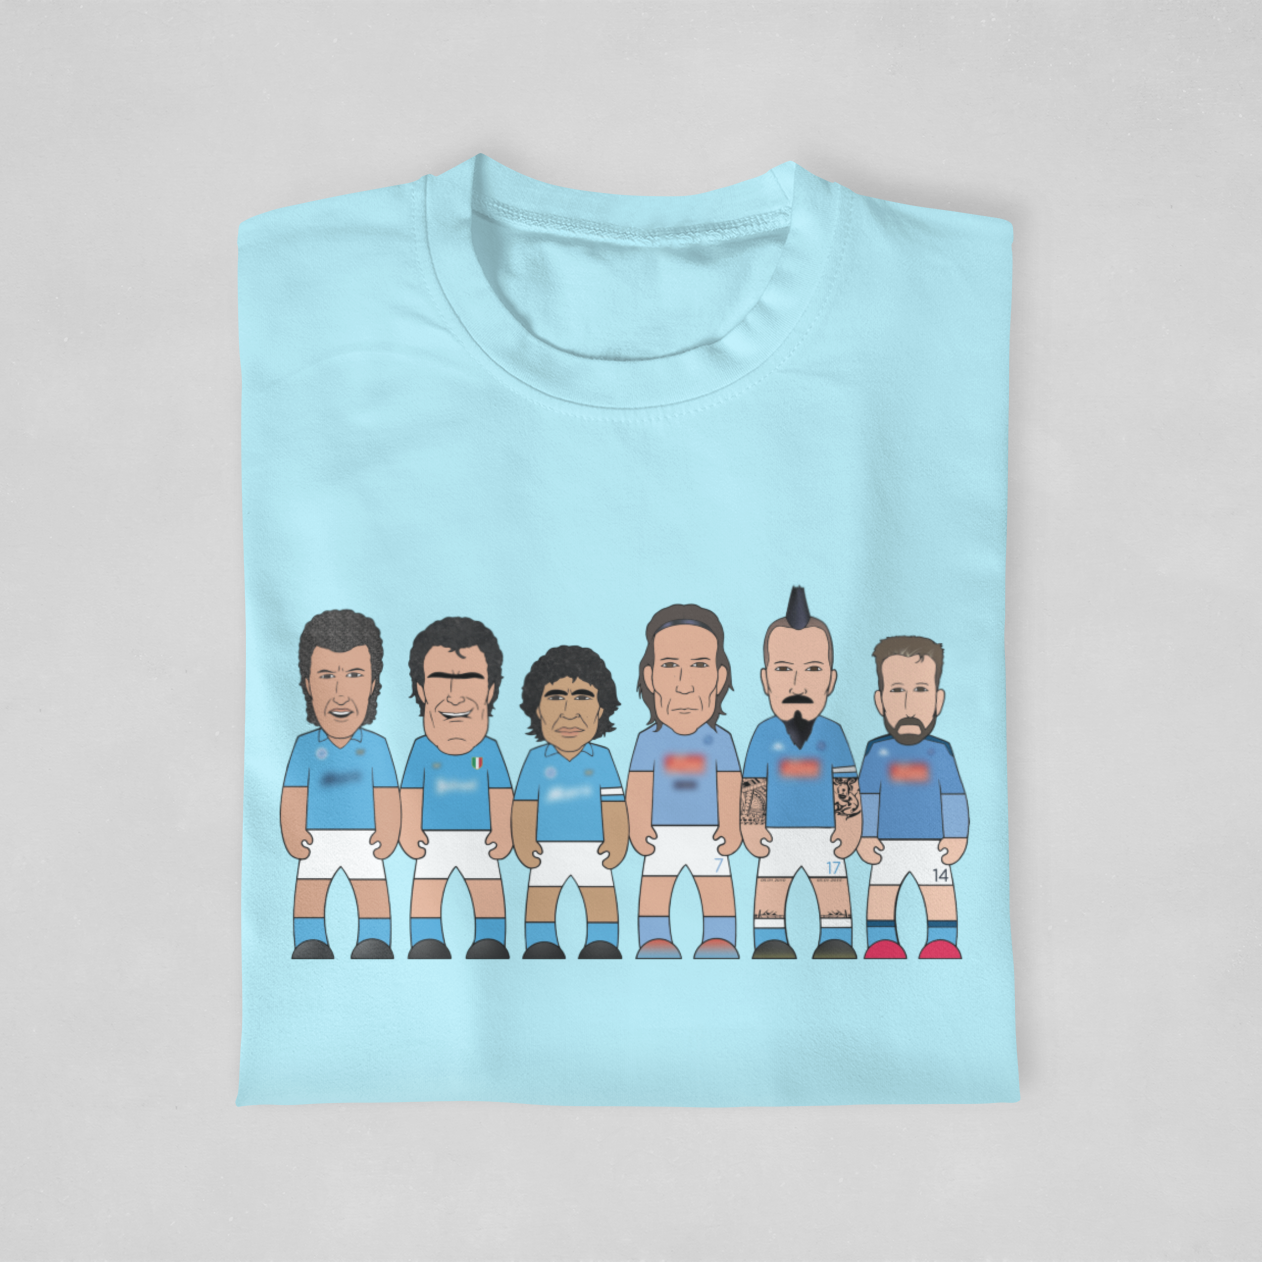 Naples Legends - Inspired by Napoli